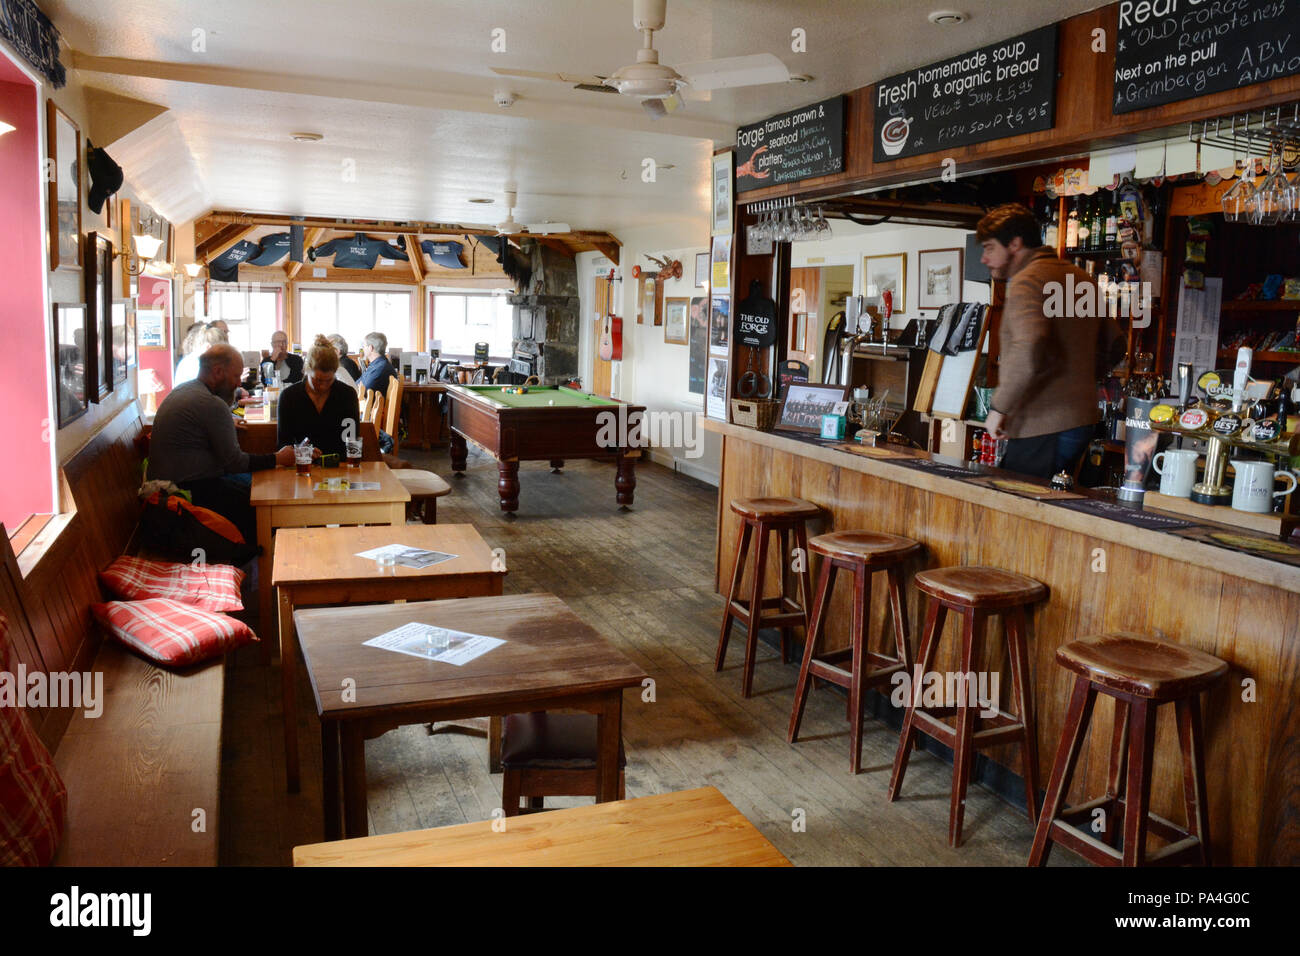 The interior of The Old Forge, the most remote pub in the mainland UK, in the town of Inverie, Knoydart Peninsula, Scotland, Great Britain. Stock Photo